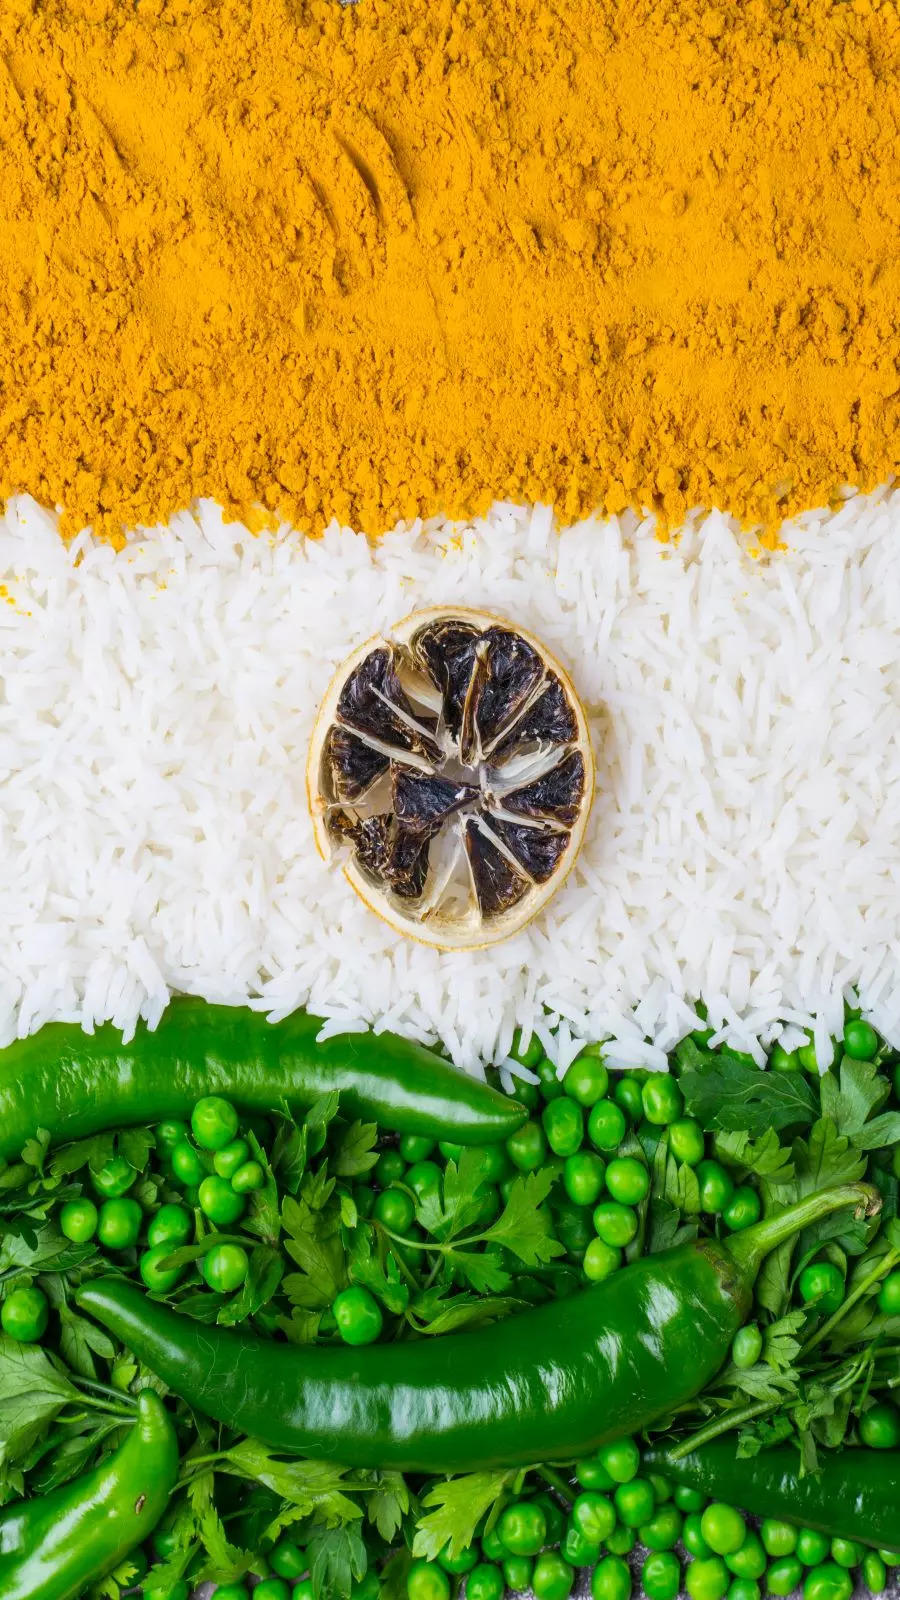 Ten easy desserts for this Independence Day | EconomicTimes